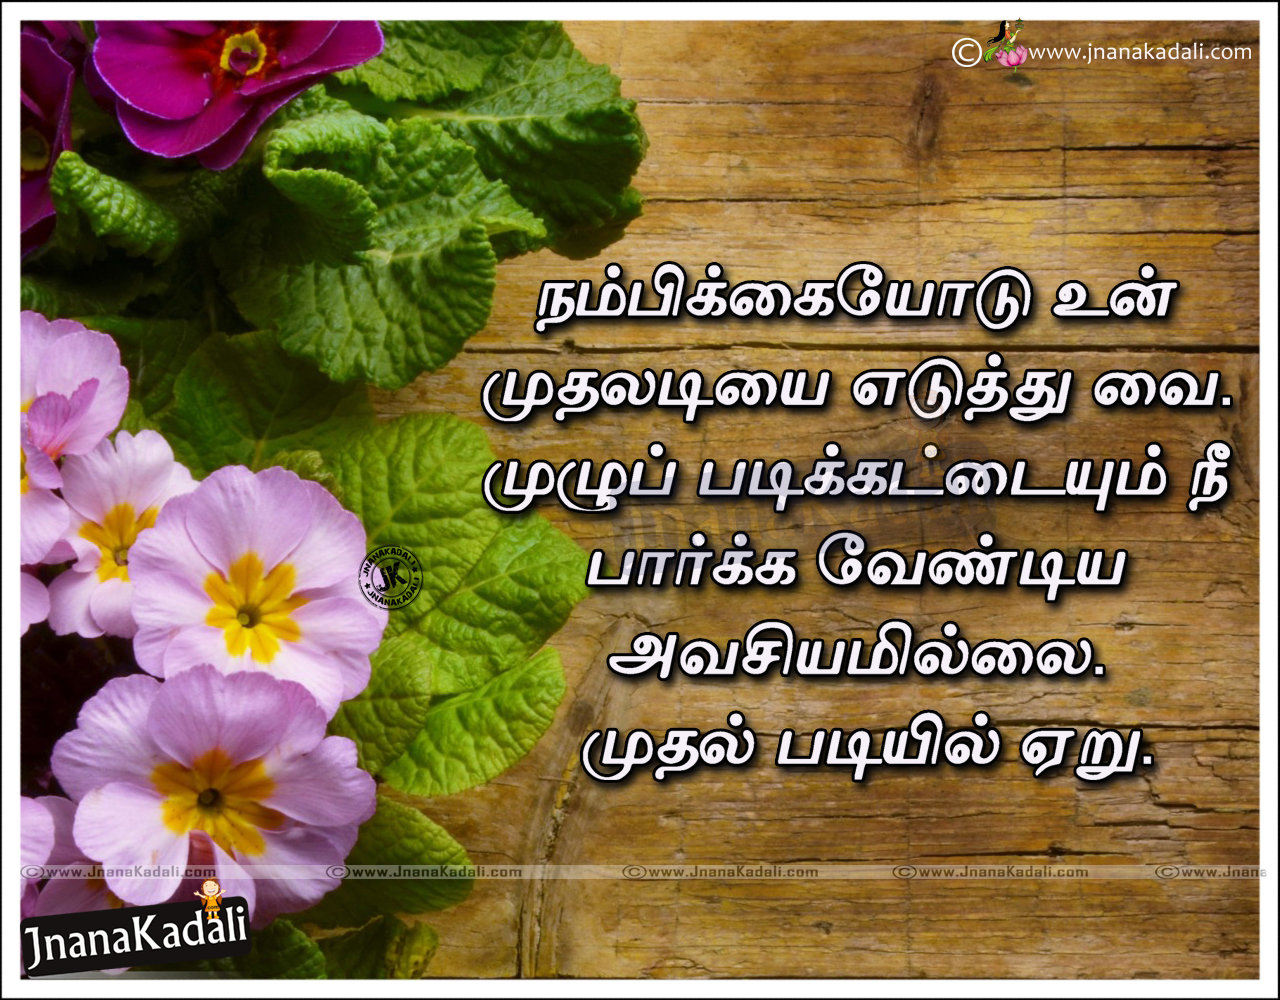 Tamil motivational Inspirational kavithai Quotes Sayings messages ...